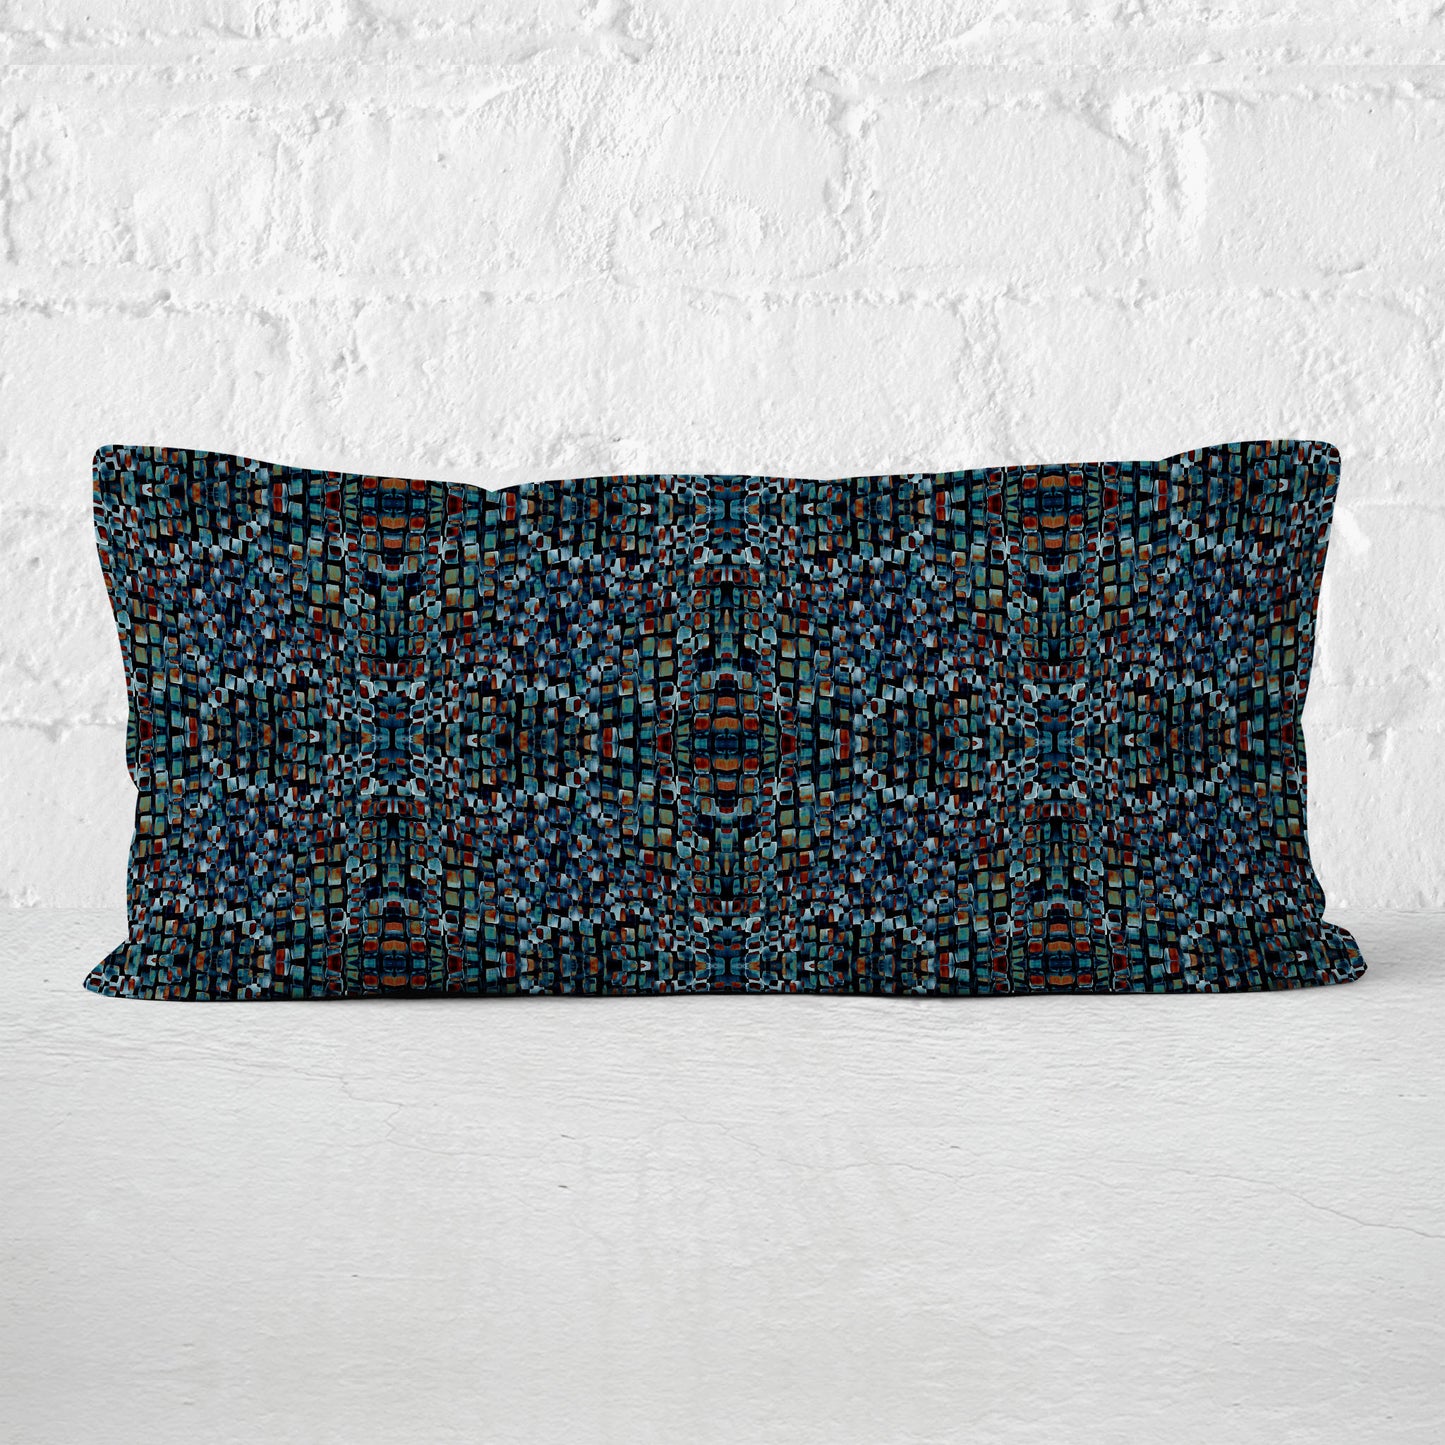 Rectangular lumbar pillow featuring an abstract hand-painted pattern in black, dark blue, and brown.